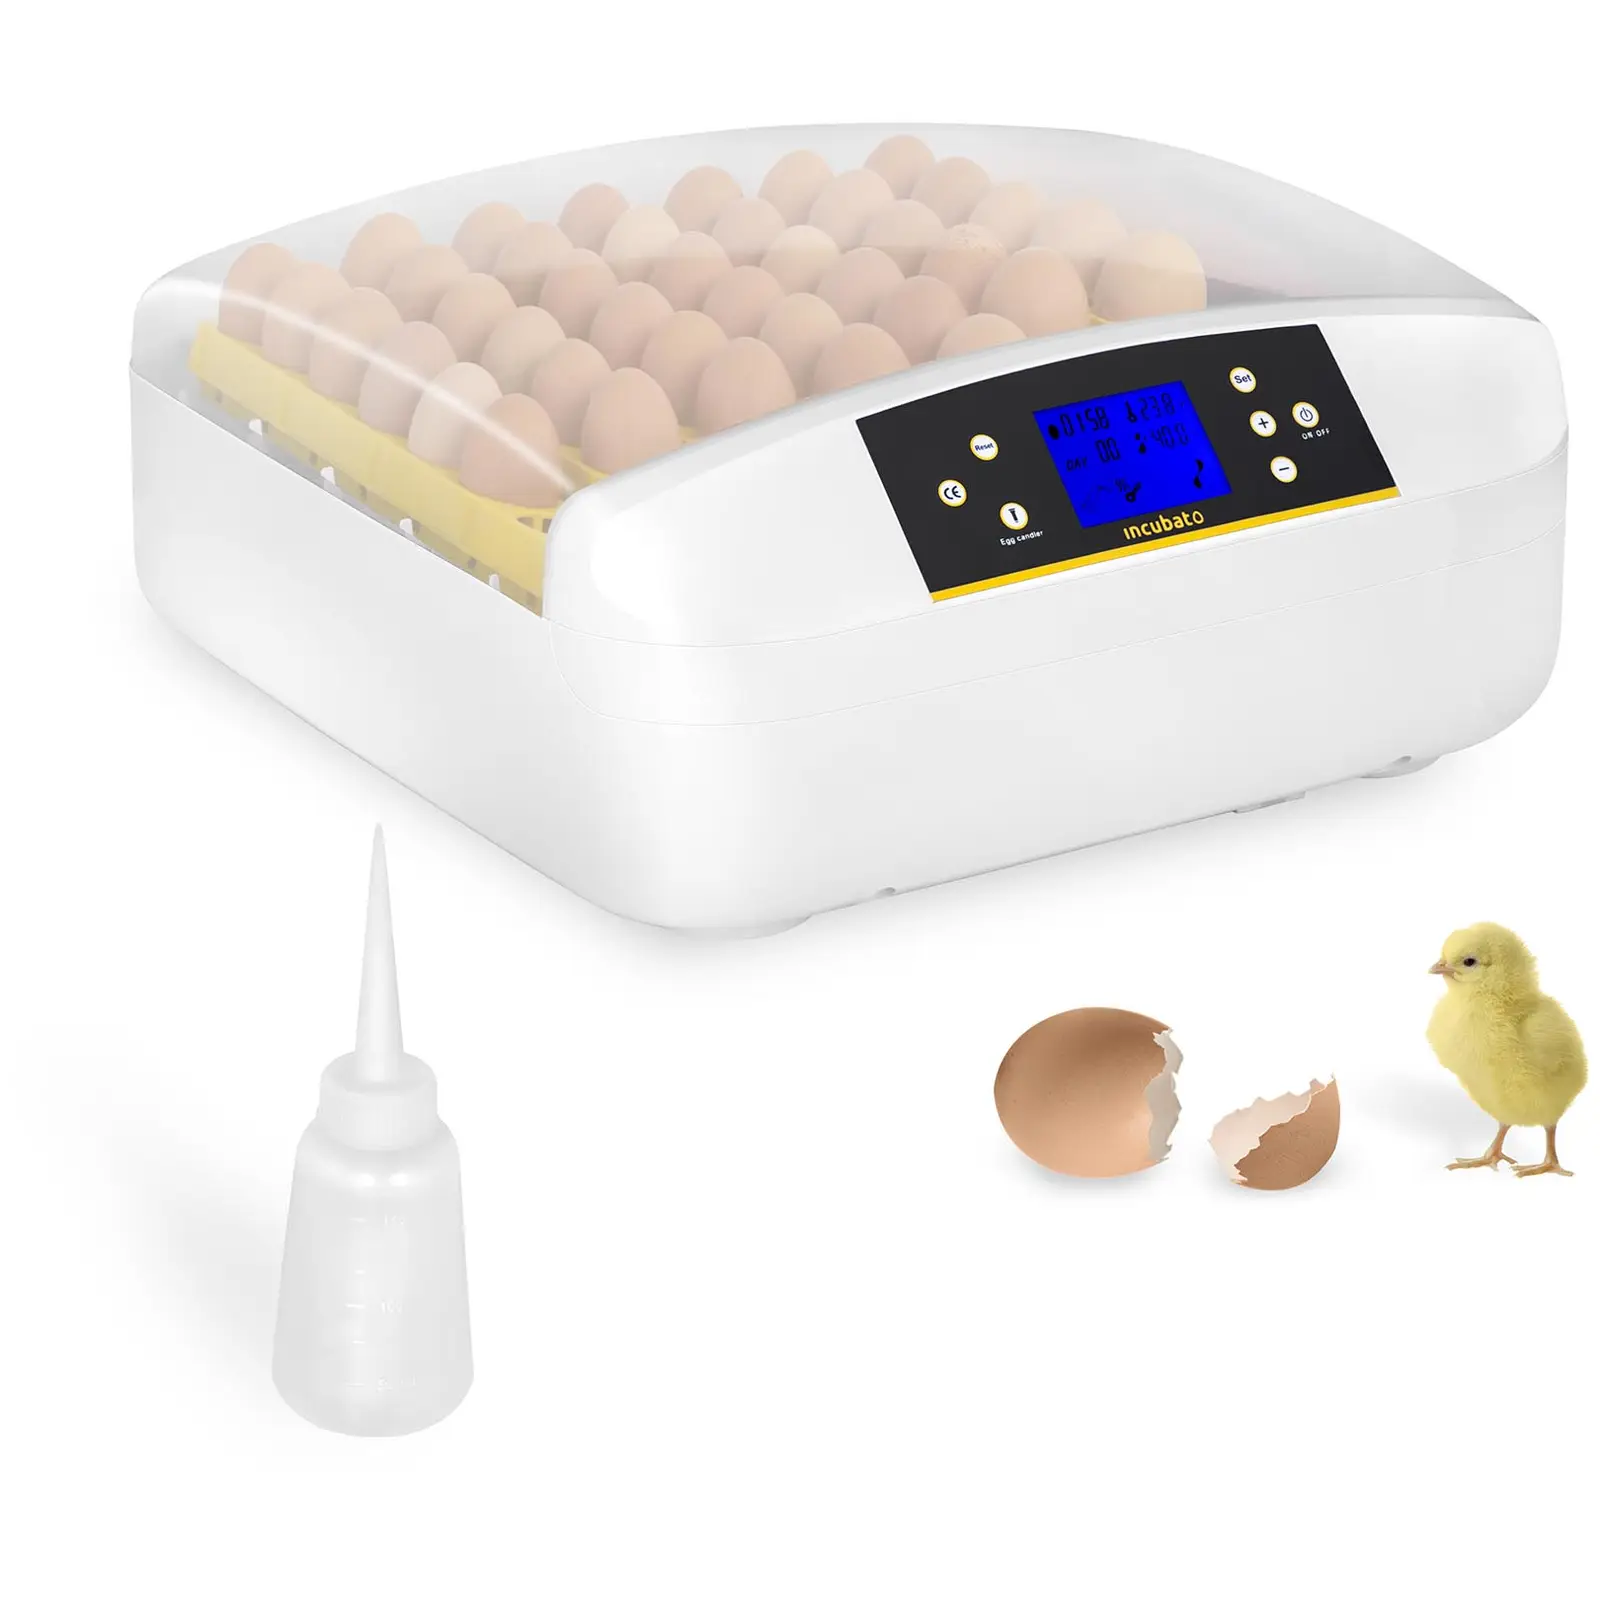 Egg Incubator - 56 Eggs - Incl. Water Dispenser - Fully Automatic